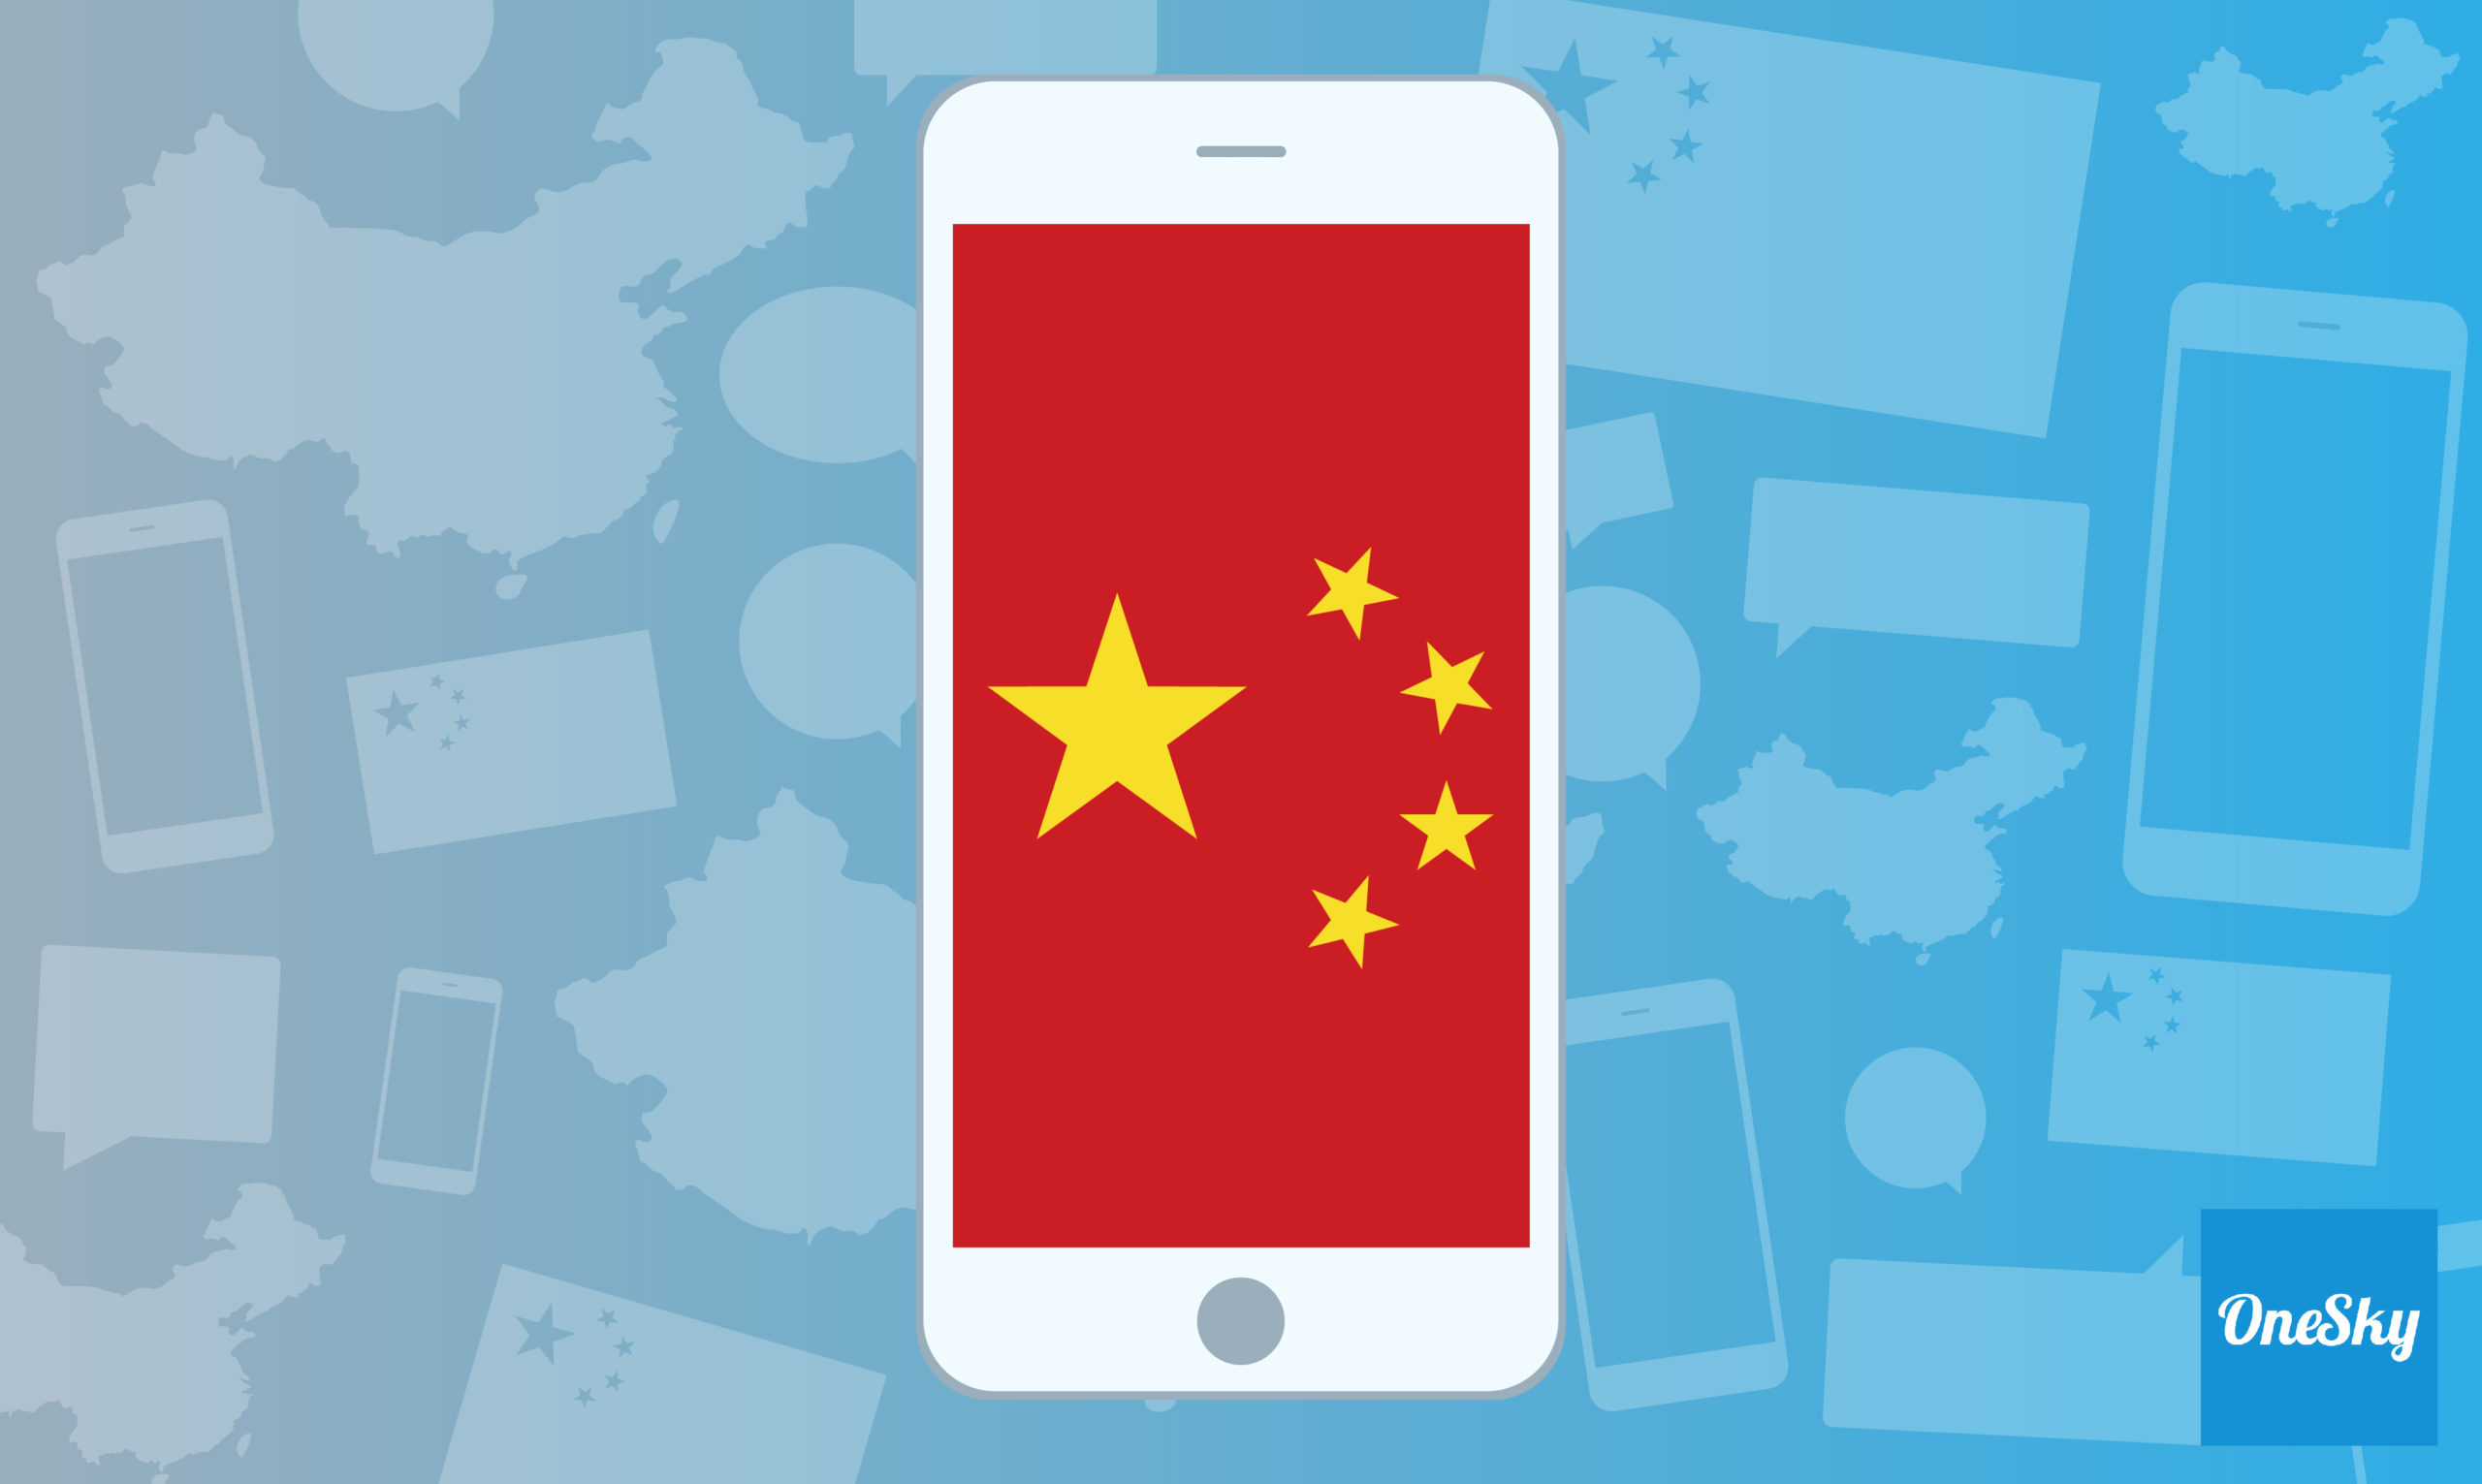 How to Launch Your App in China: 7 Key Principles